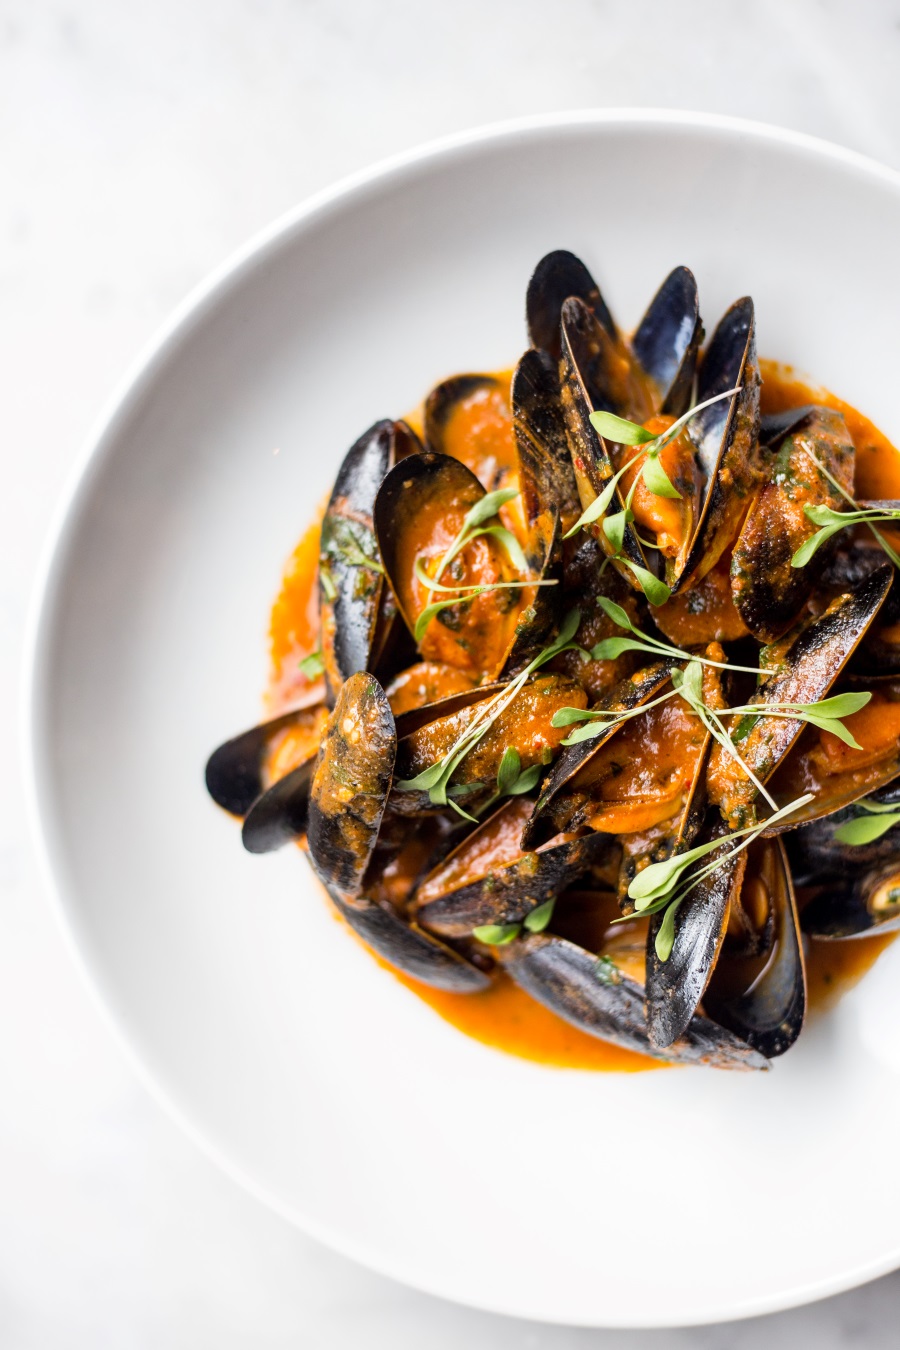 Mussels at Pizarro. Image 2